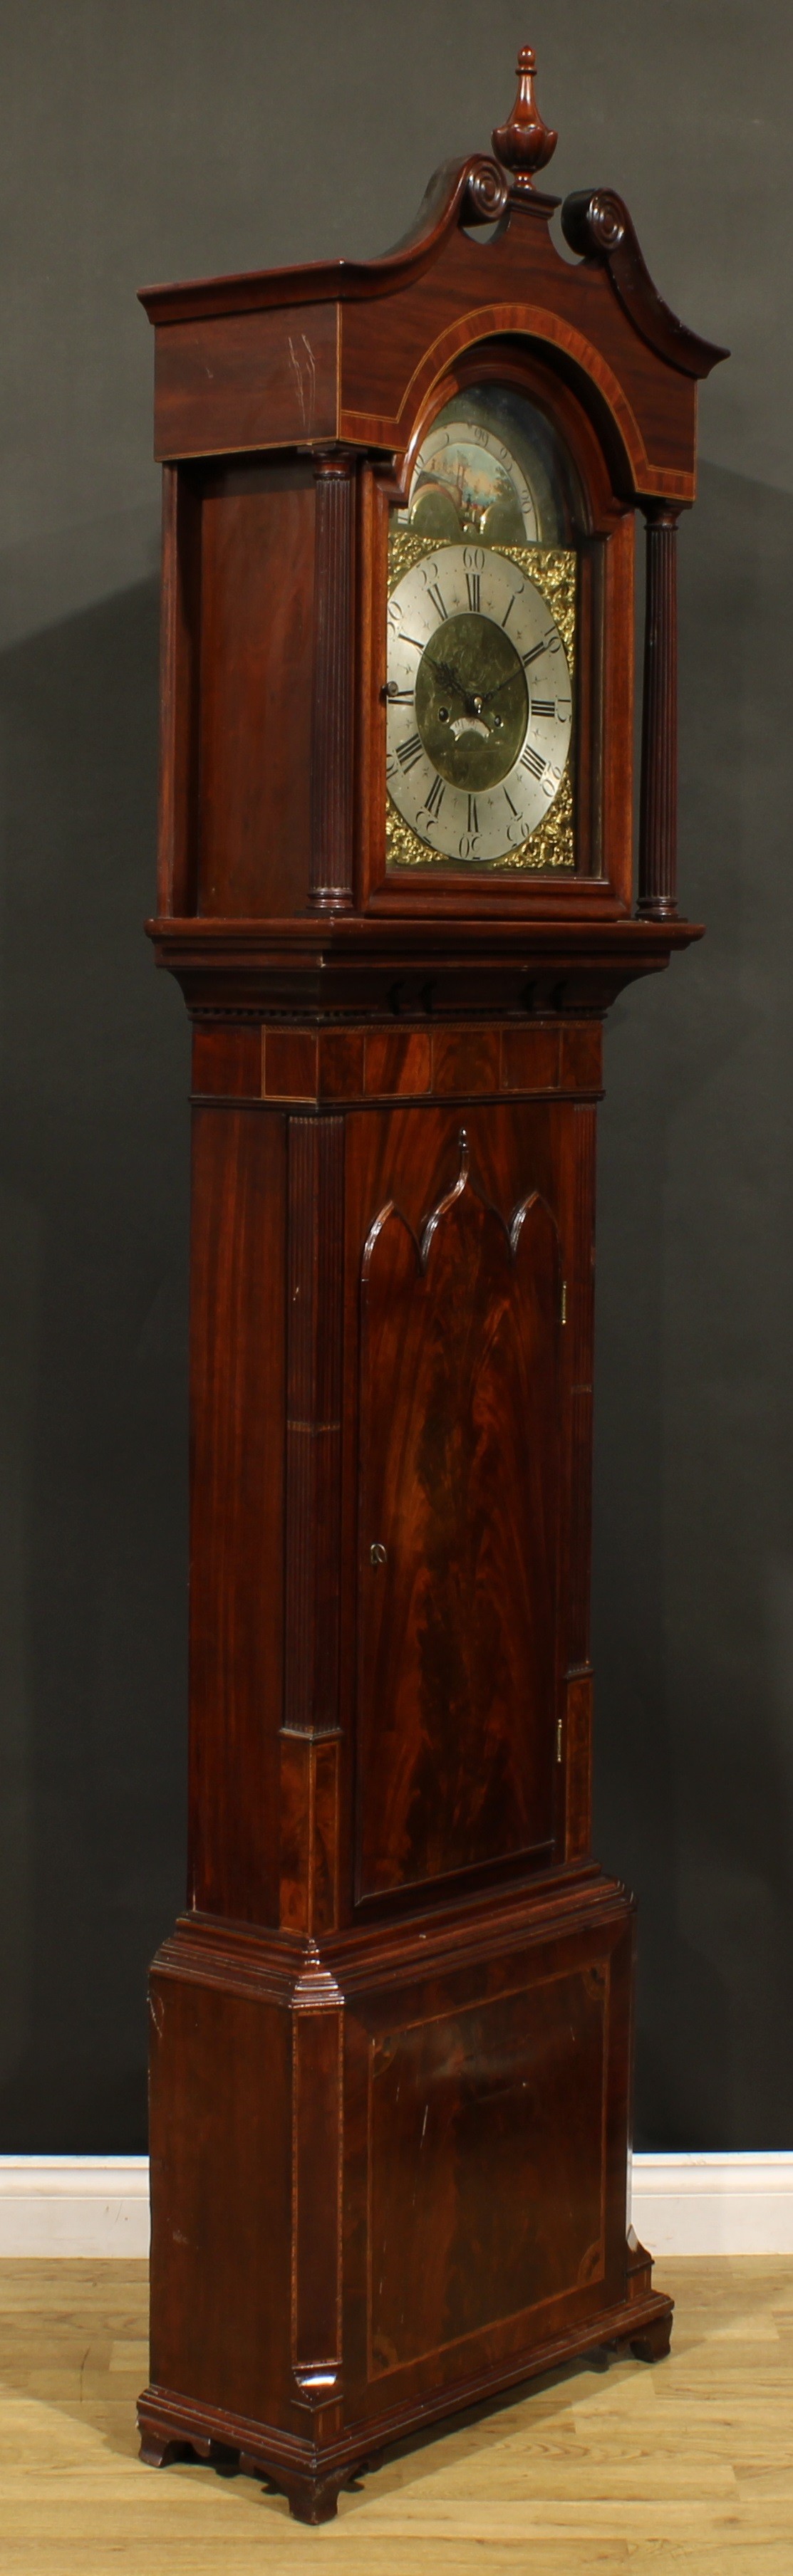 A George IV Lancashire mahogany longcase clock, 34cm arched brass dial inscribed EDMD SCHOLFIELD, - Image 2 of 7